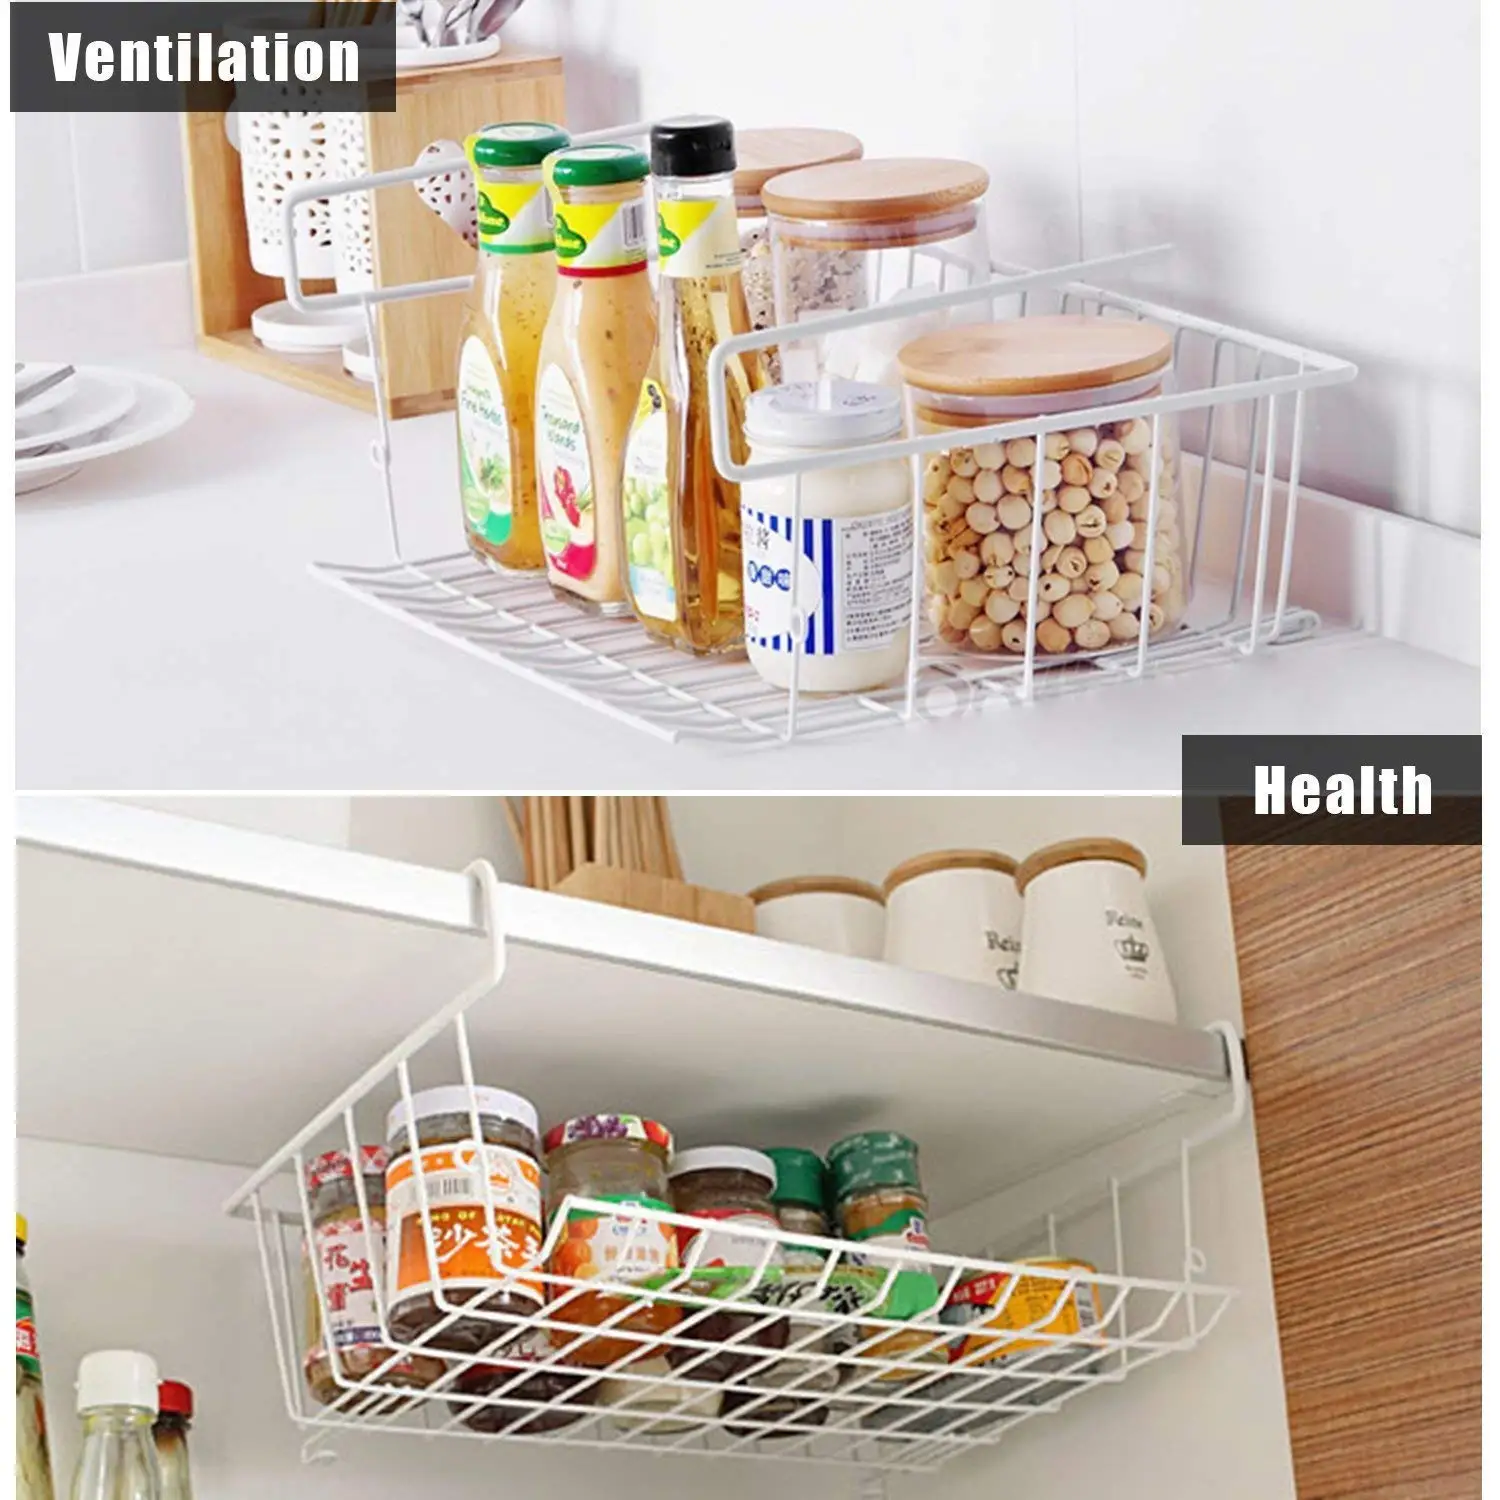 Creatice Kitchen Storage Shelves With Baskets for Small Space